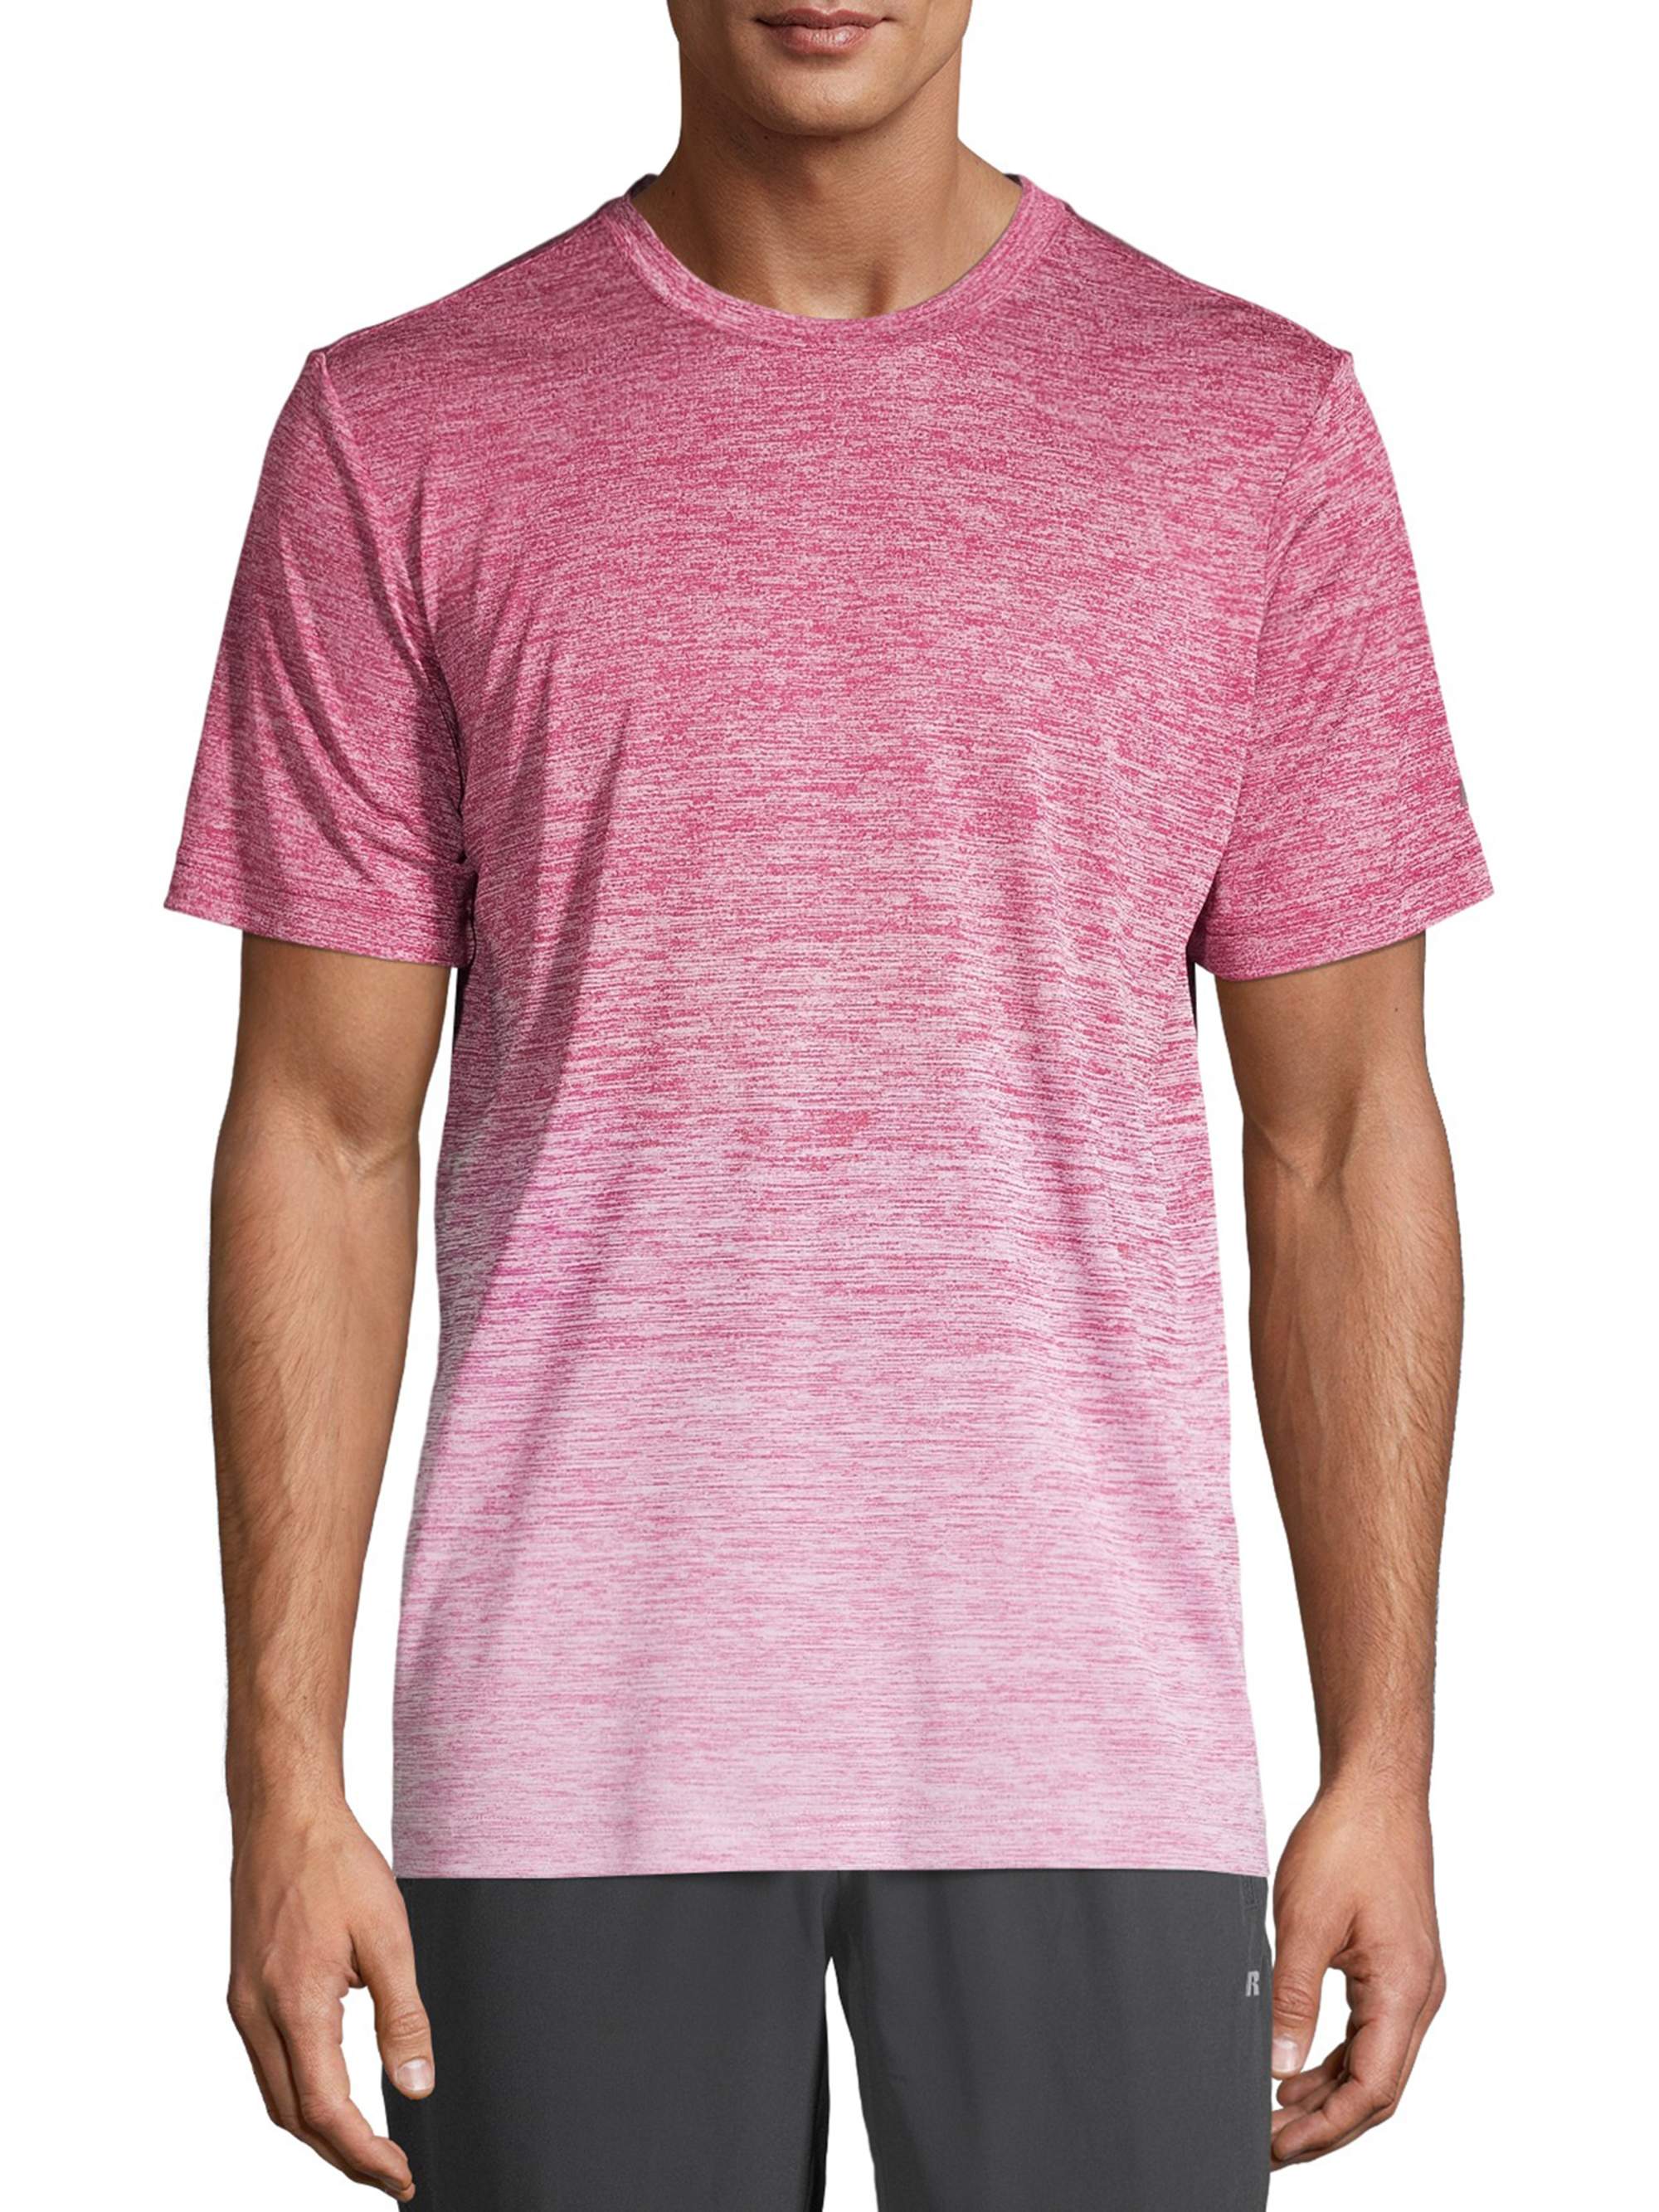 Russell Men's and Big Men's Ombre Performance Tee, up to Size 5XL - image 1 of 6